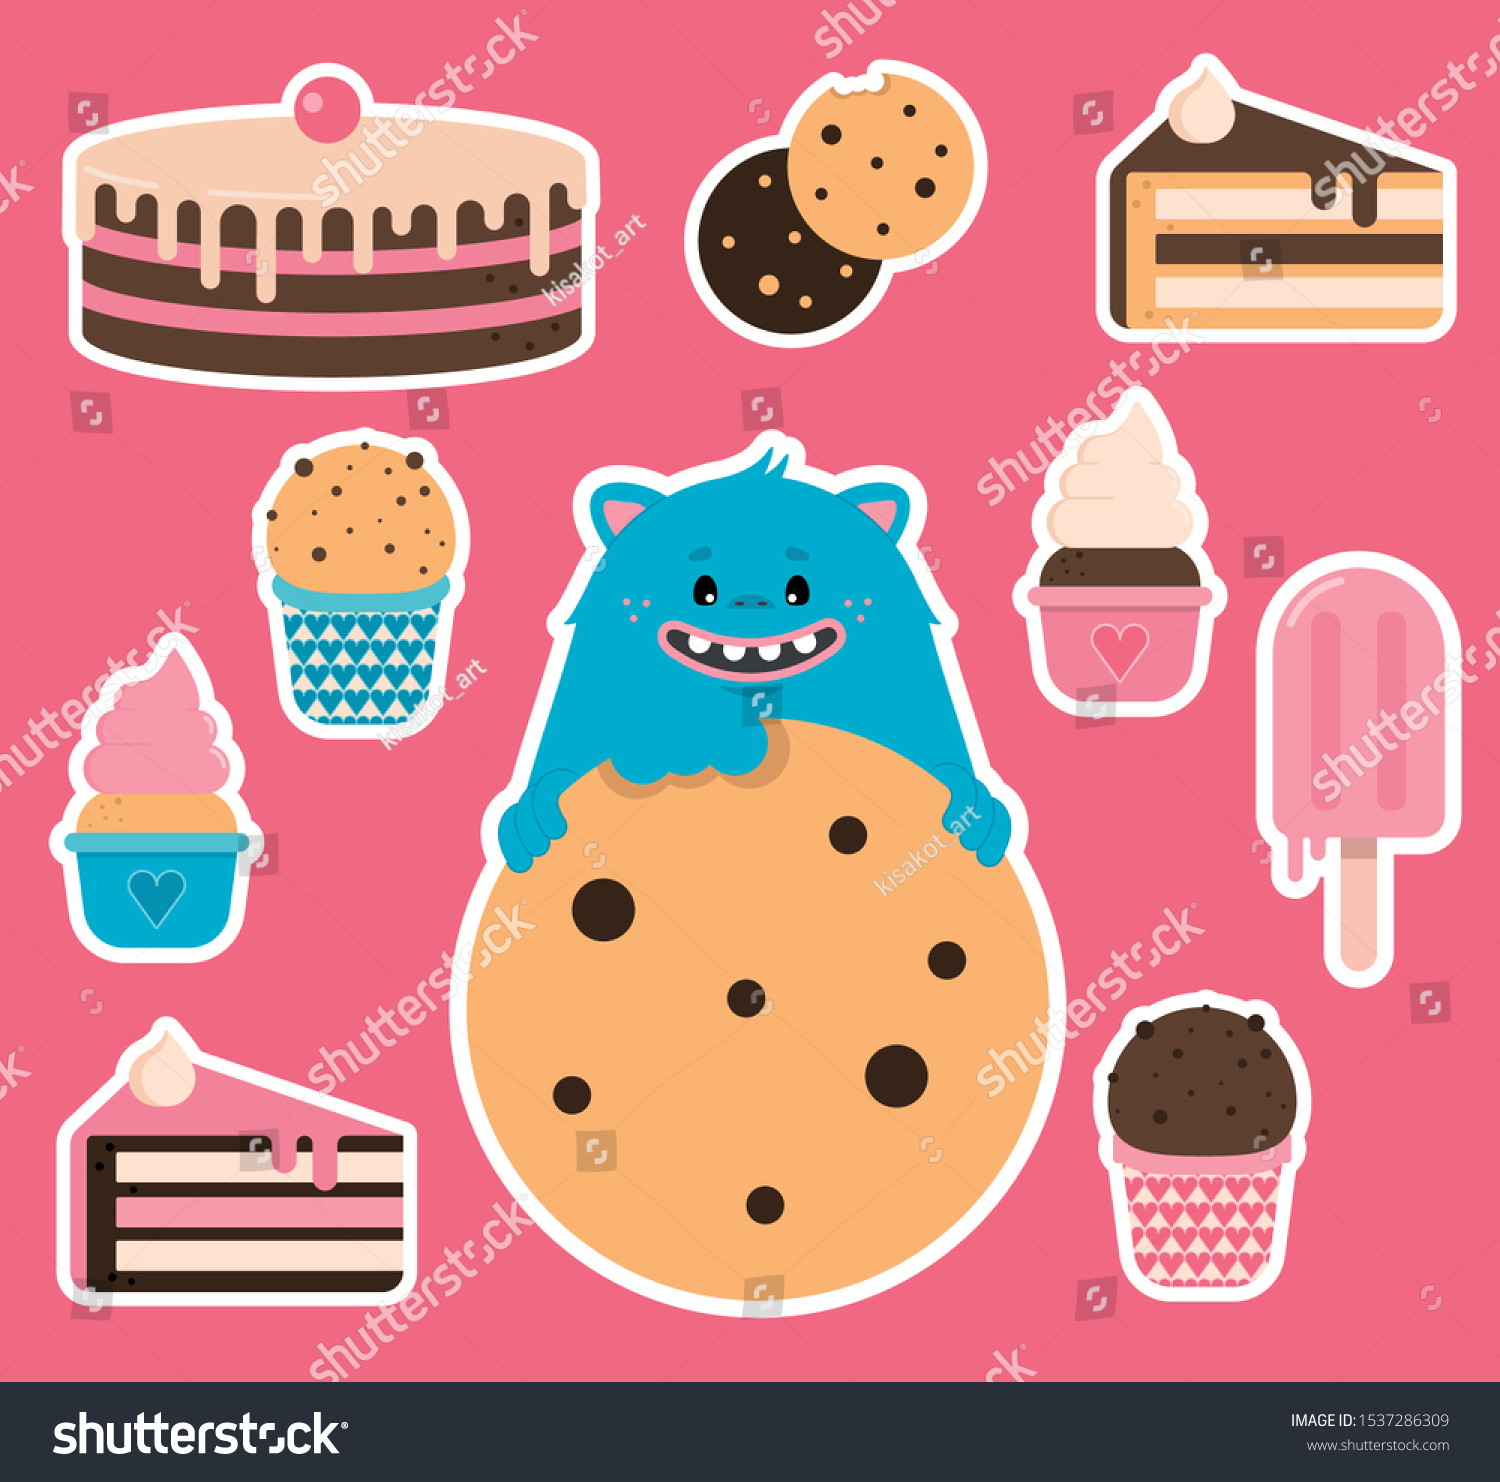 SVG of sticker pack with a Cookie Monster and sweets on a pink background svg